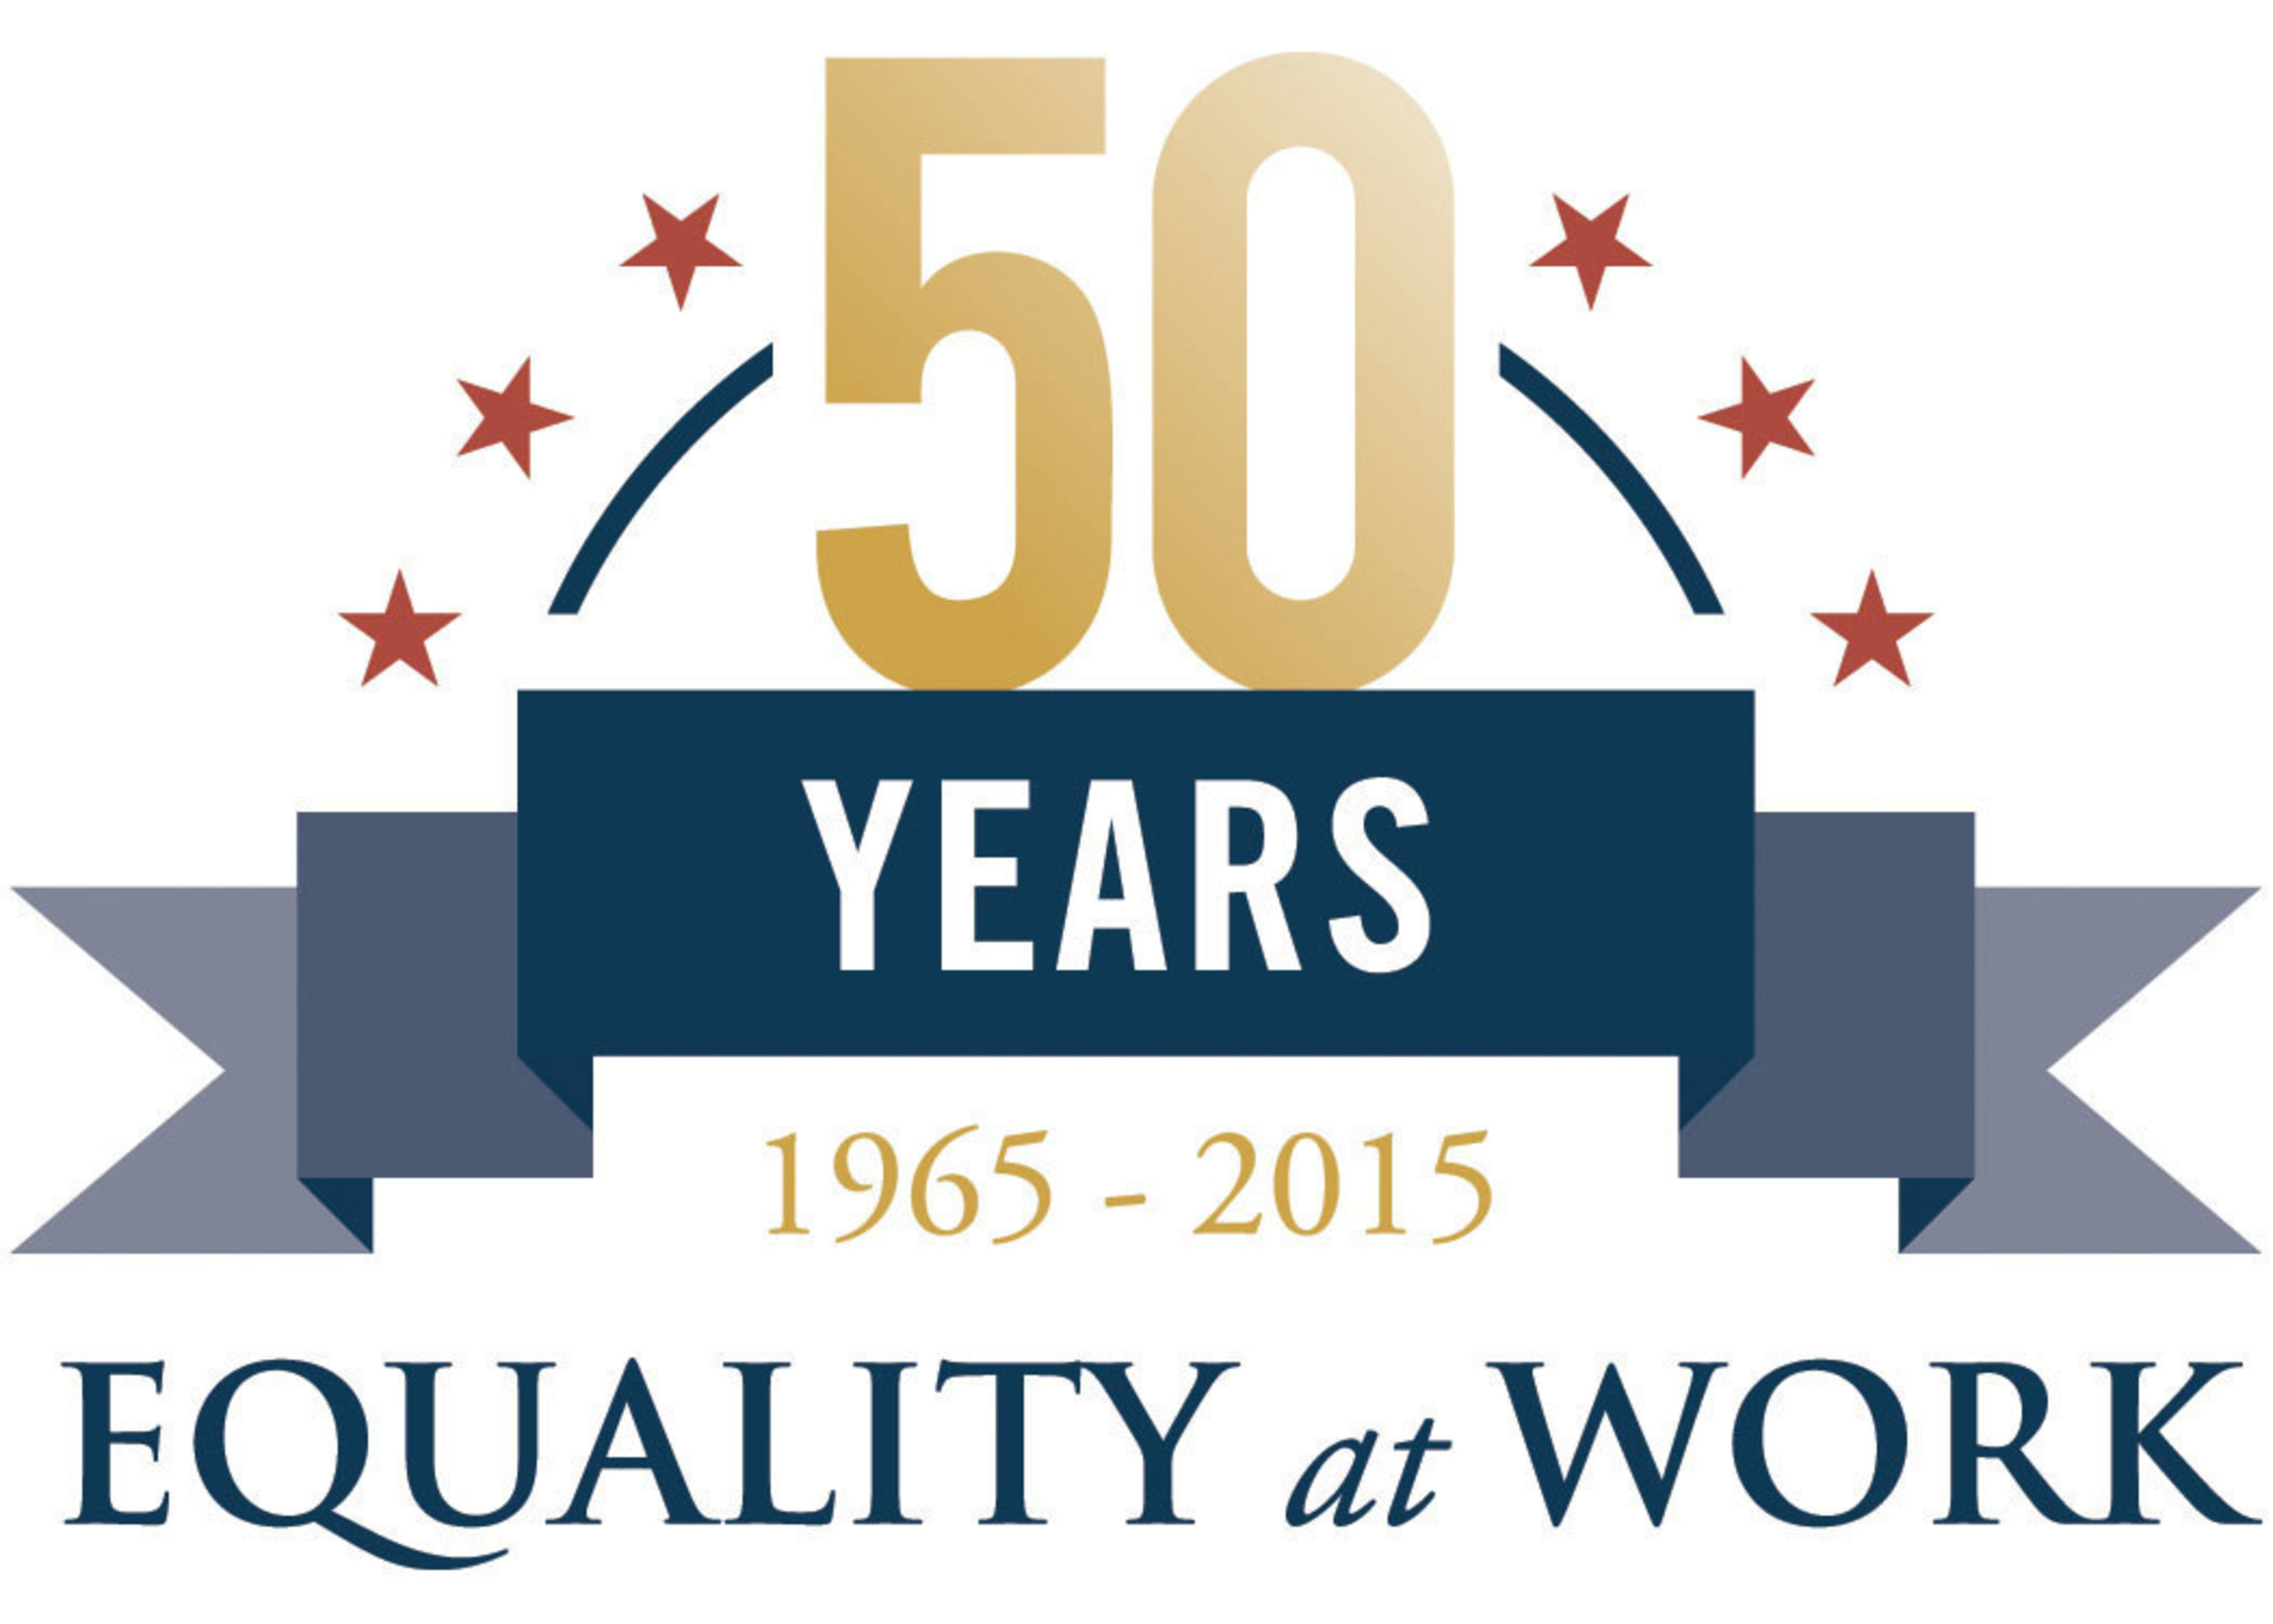 Civil Rights And Federal Contractor Communities Unite In Celebration Of 50 Years Of Equality At Work